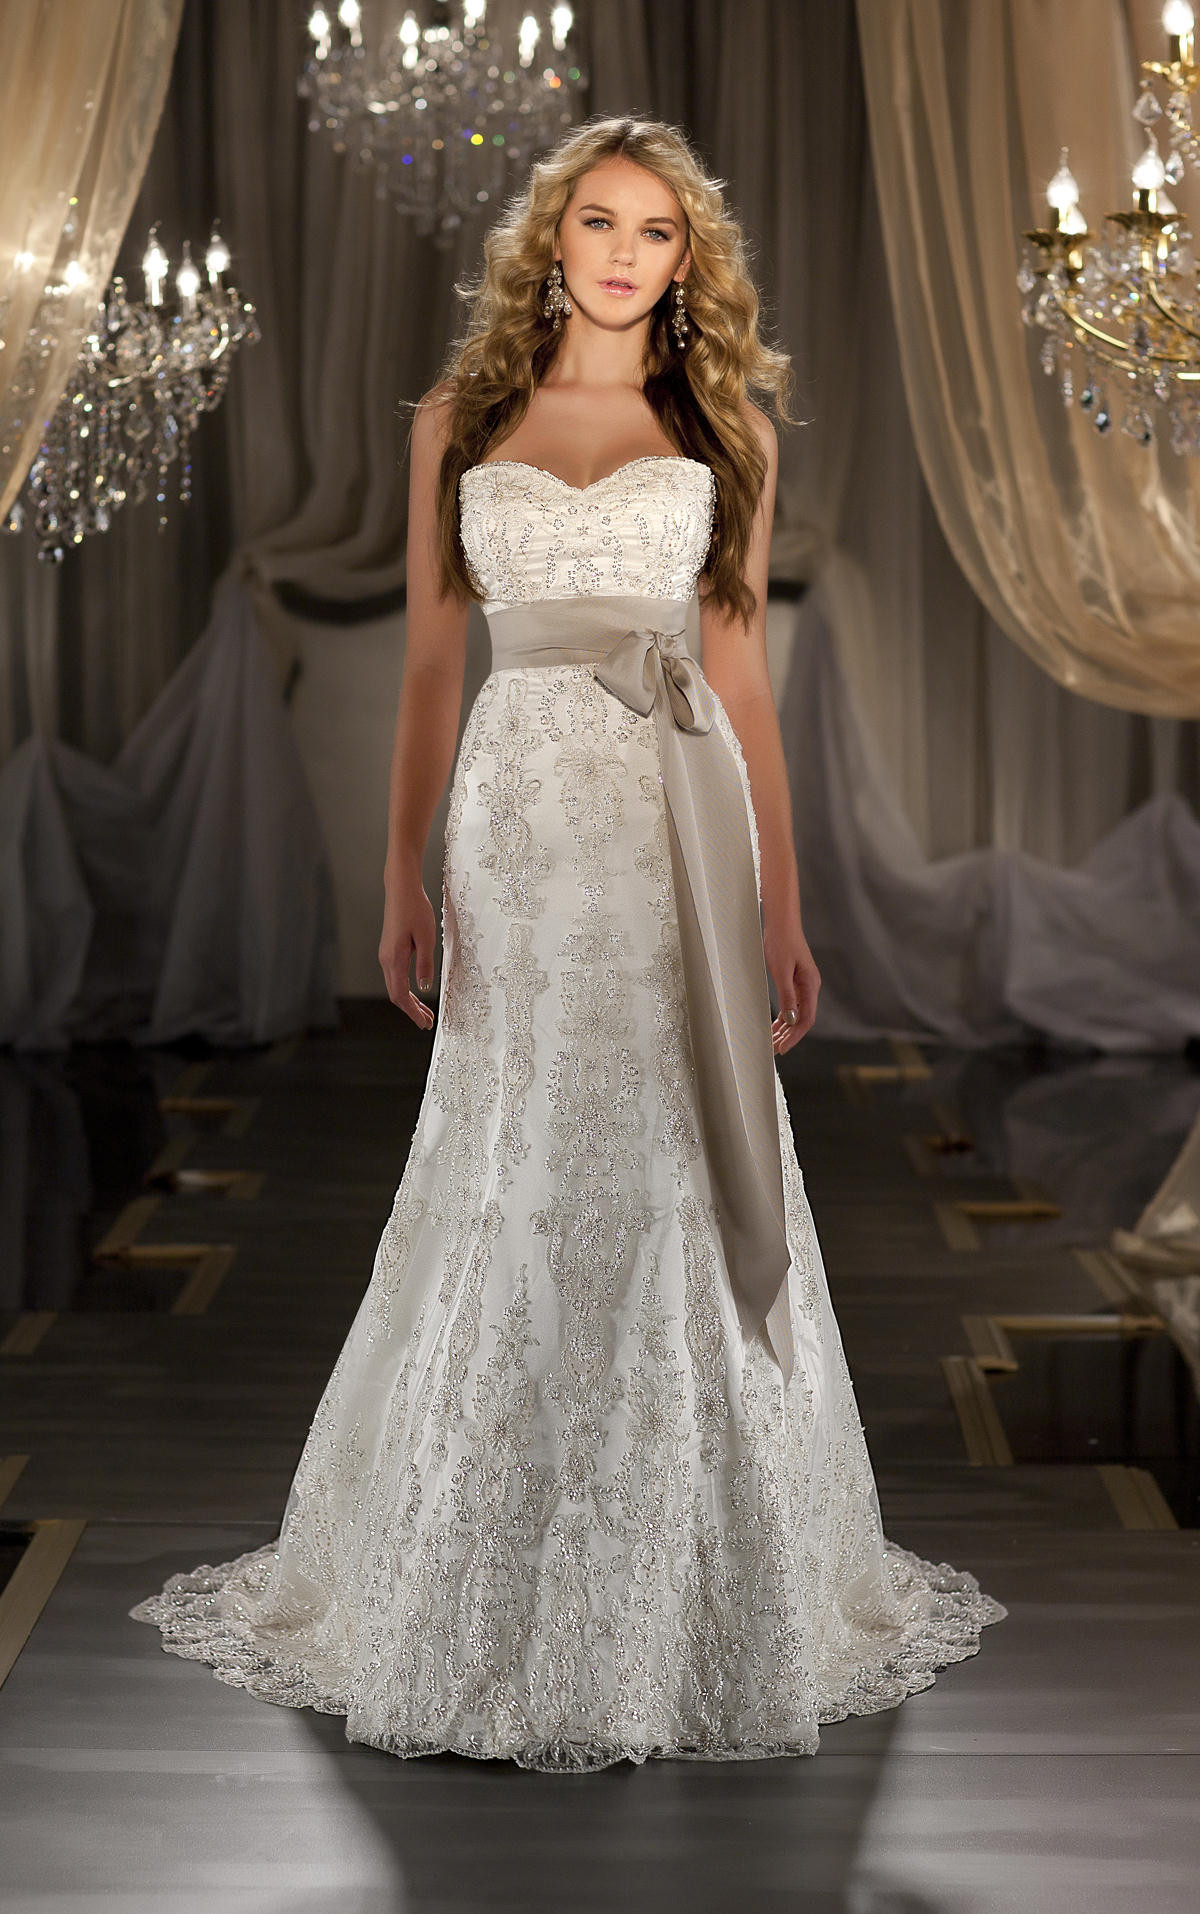 Lace Sweetheart Wedding Dress
 YOUR NECKLINE